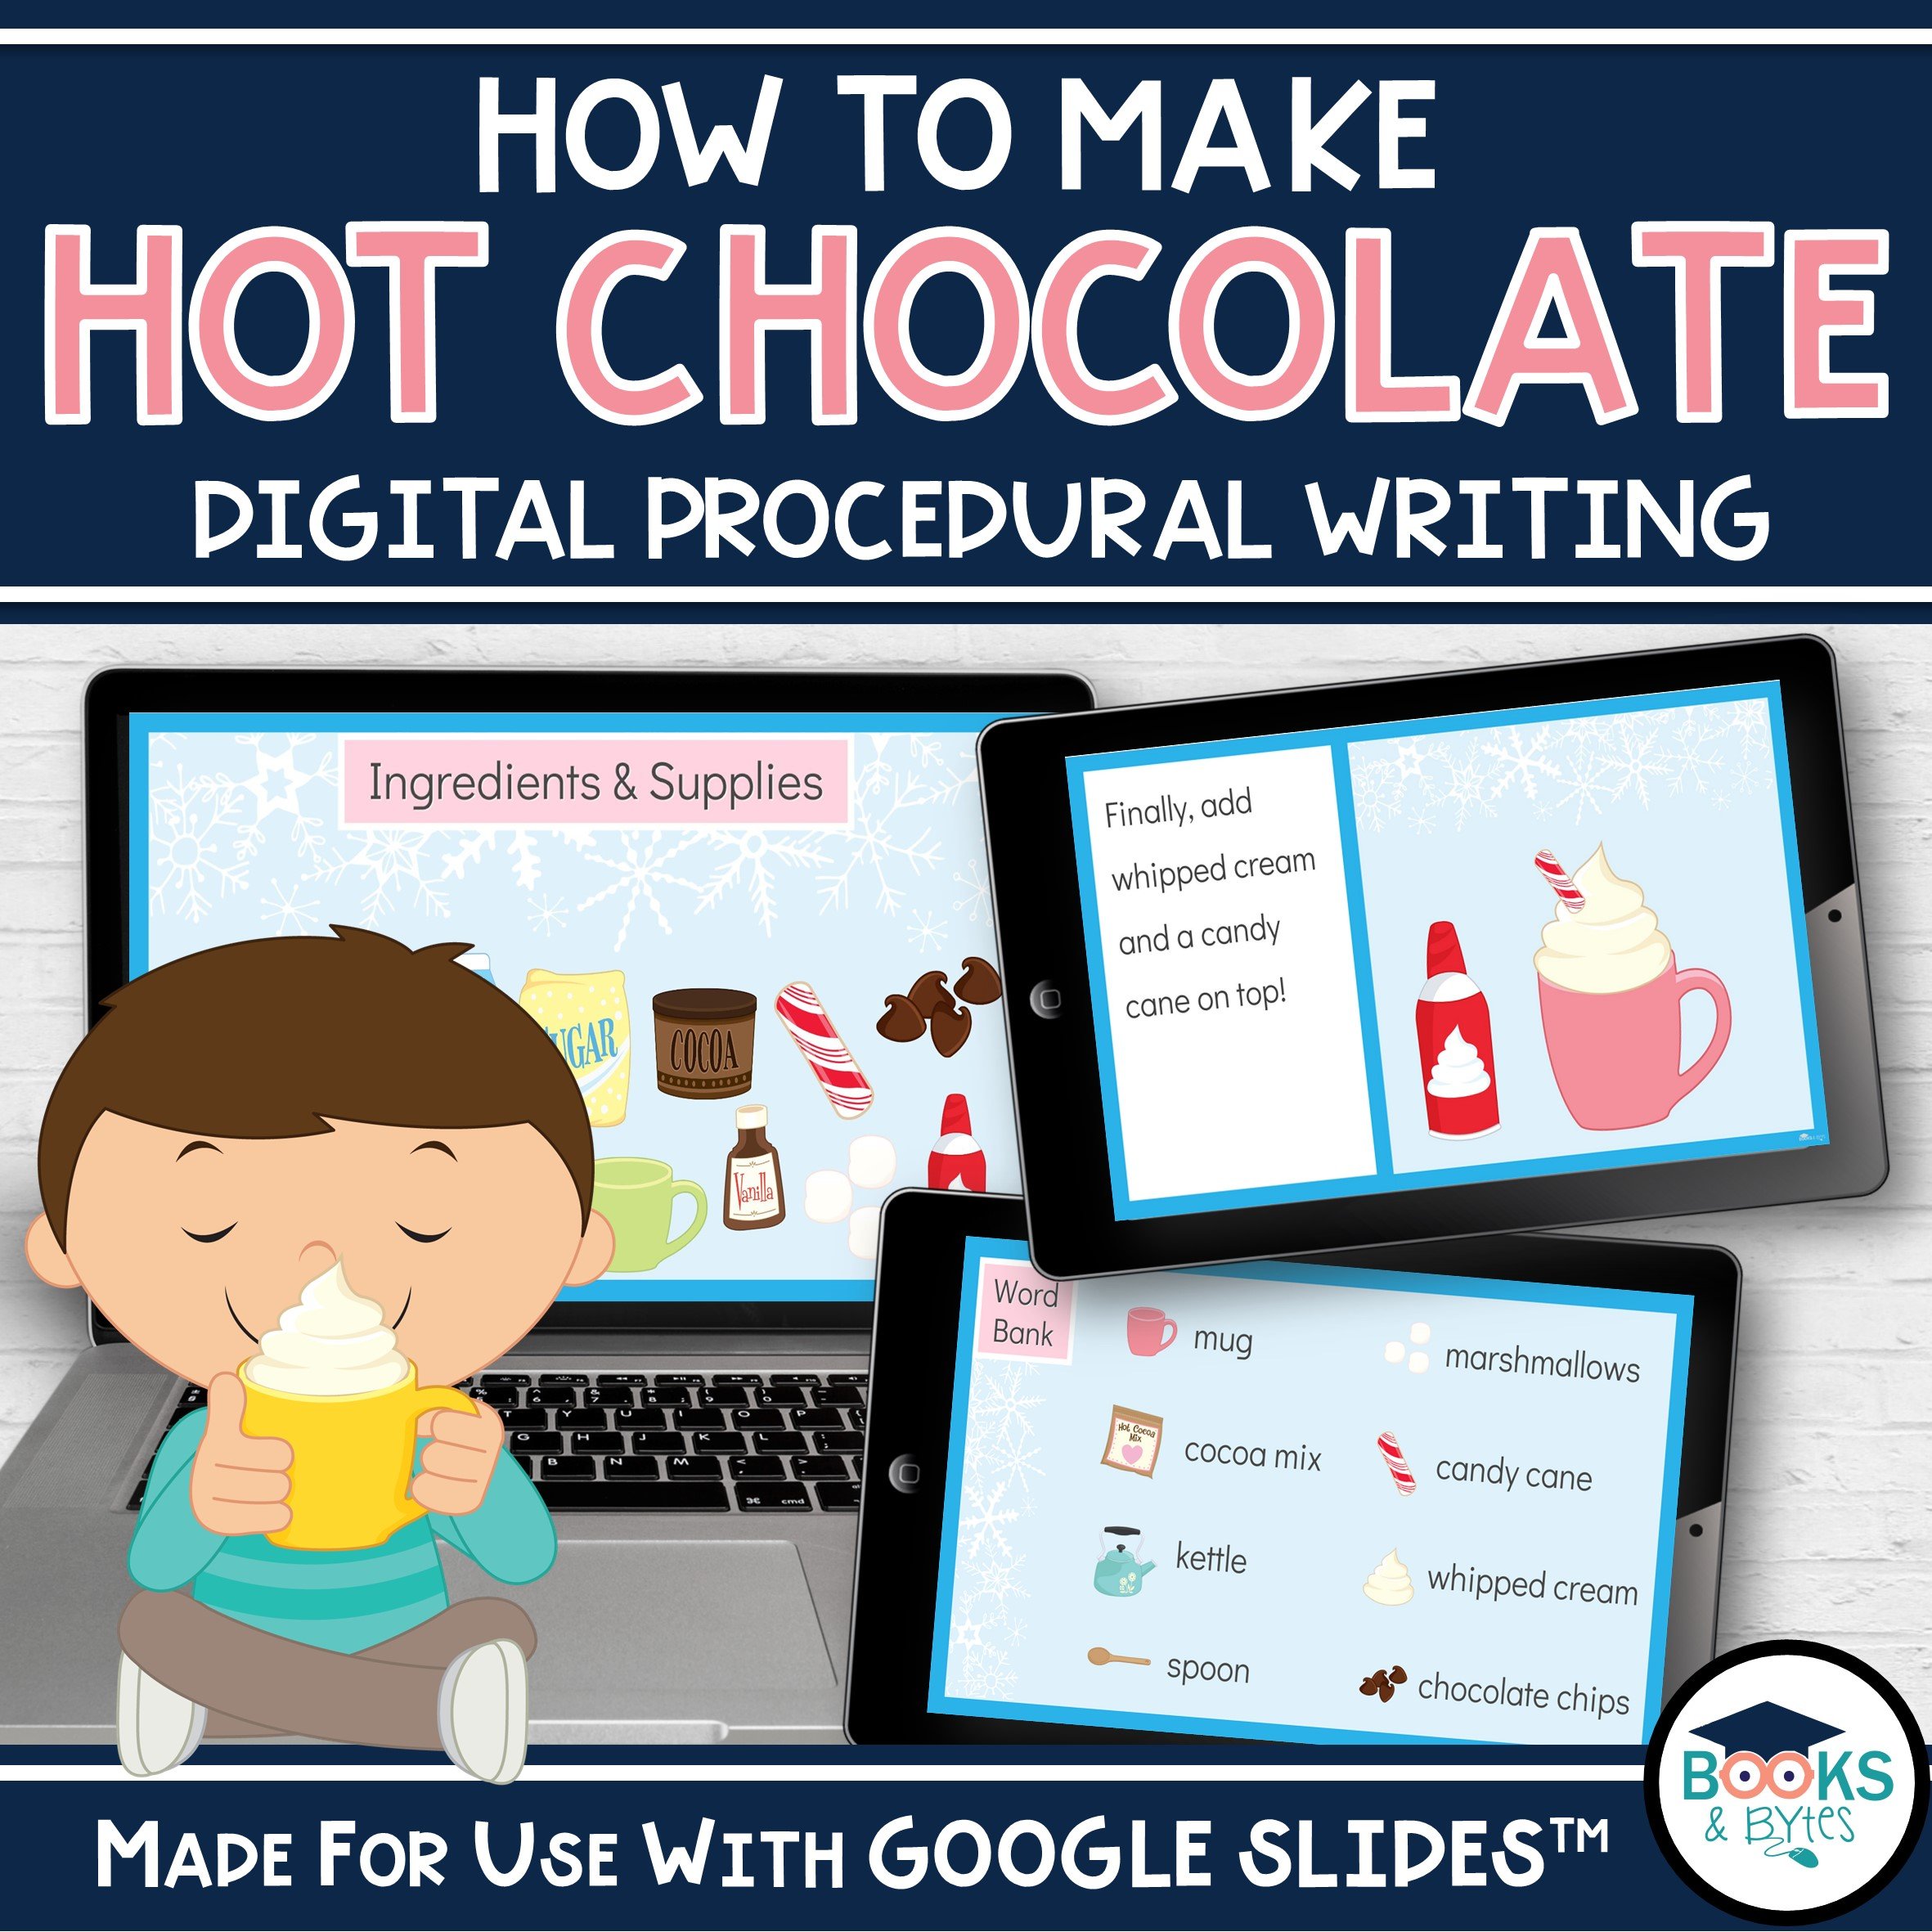 How to make hot chocolate cover.jpg